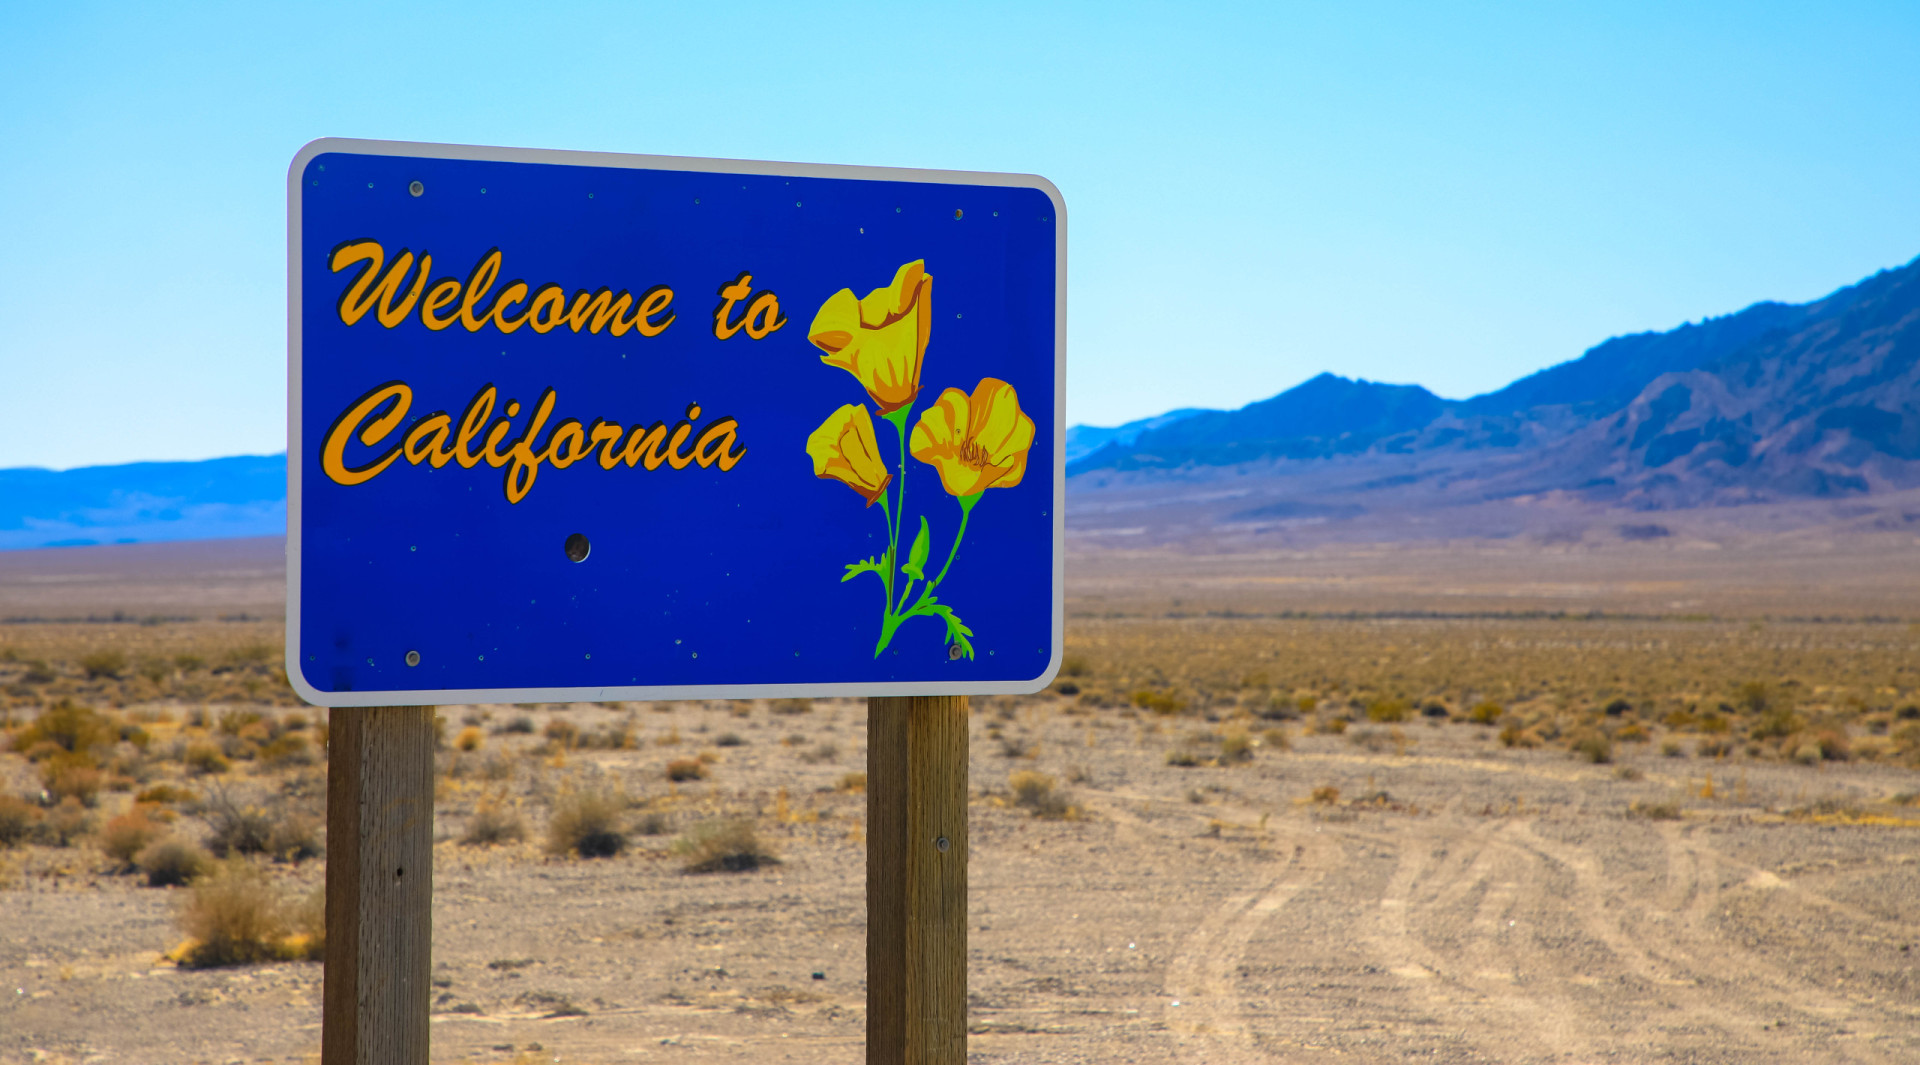 <p>This sign features California golden poppies, one of the natural symbols of The Golden State.</p><p><a href="https://www.msn.com/en-us/community/channel/vid-7xx8mnucu55yw63we9va2gwr7uihbxwc68fxqp25x6tg4ftibpra?cvid=94631541bc0f4f89bfd59158d696ad7e">Follow us and access great exclusive content every day</a></p>